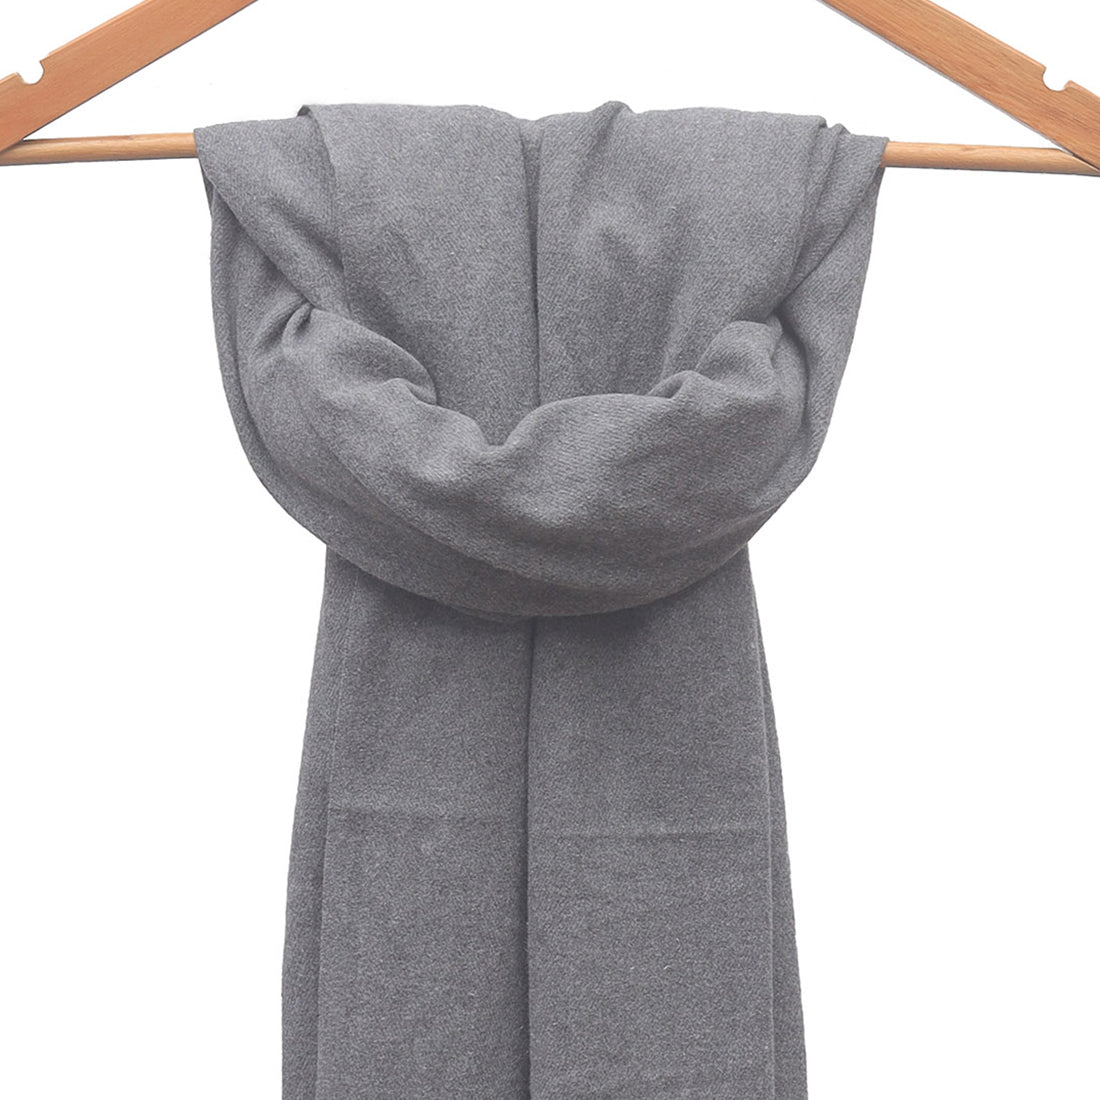 Ayesha Grey Acrylic Winter Scarf with Long Fringes - Special Cashmere-Like Feel